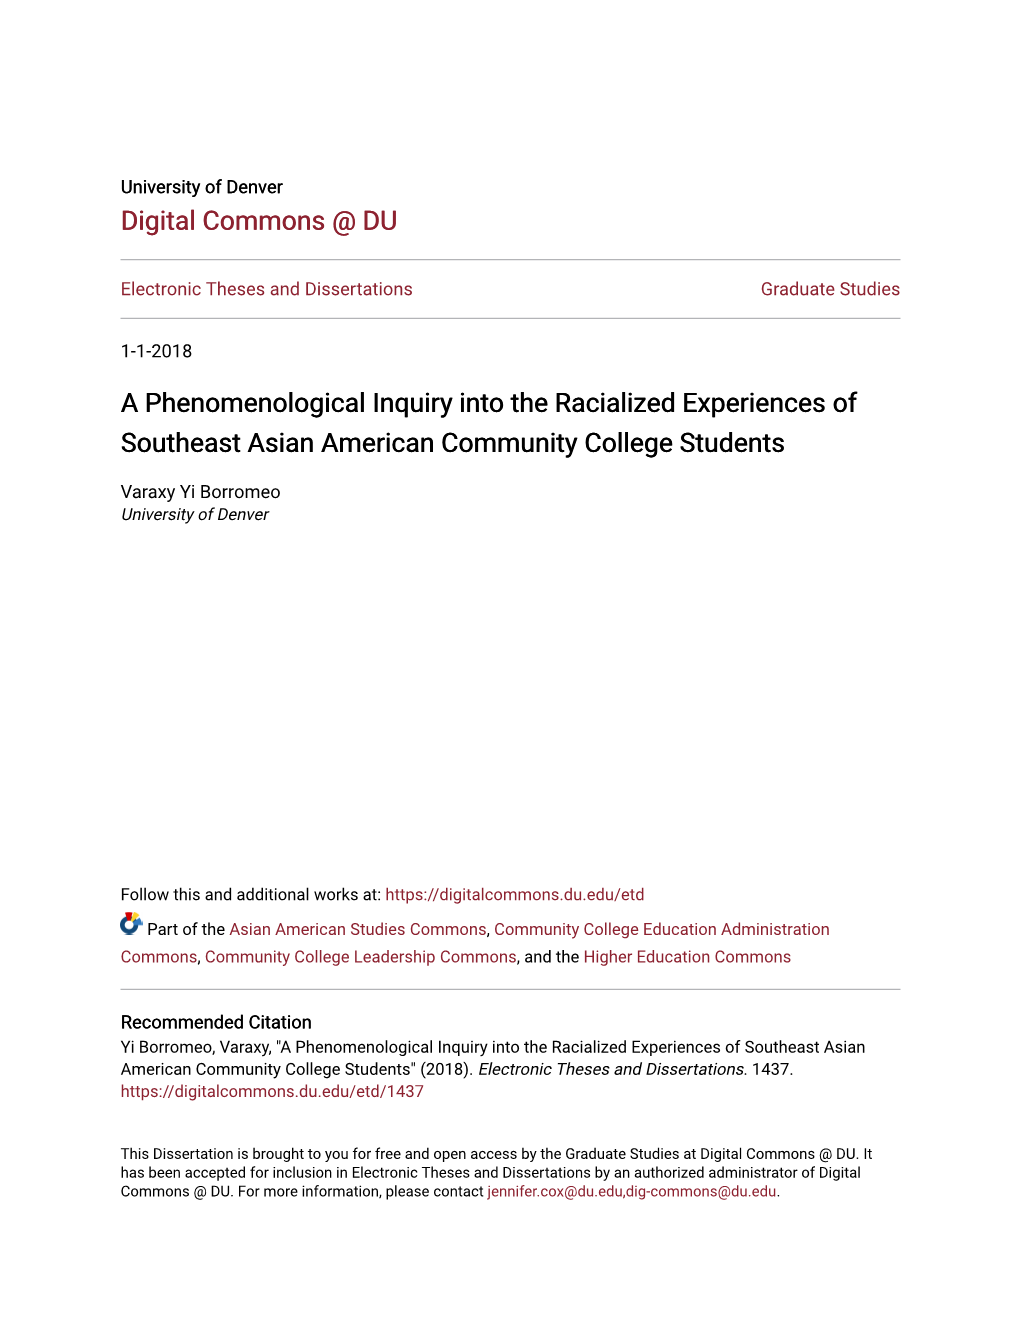 A Phenomenological Inquiry Into the Racialized Experiences of Southeast Asian American Community College Students